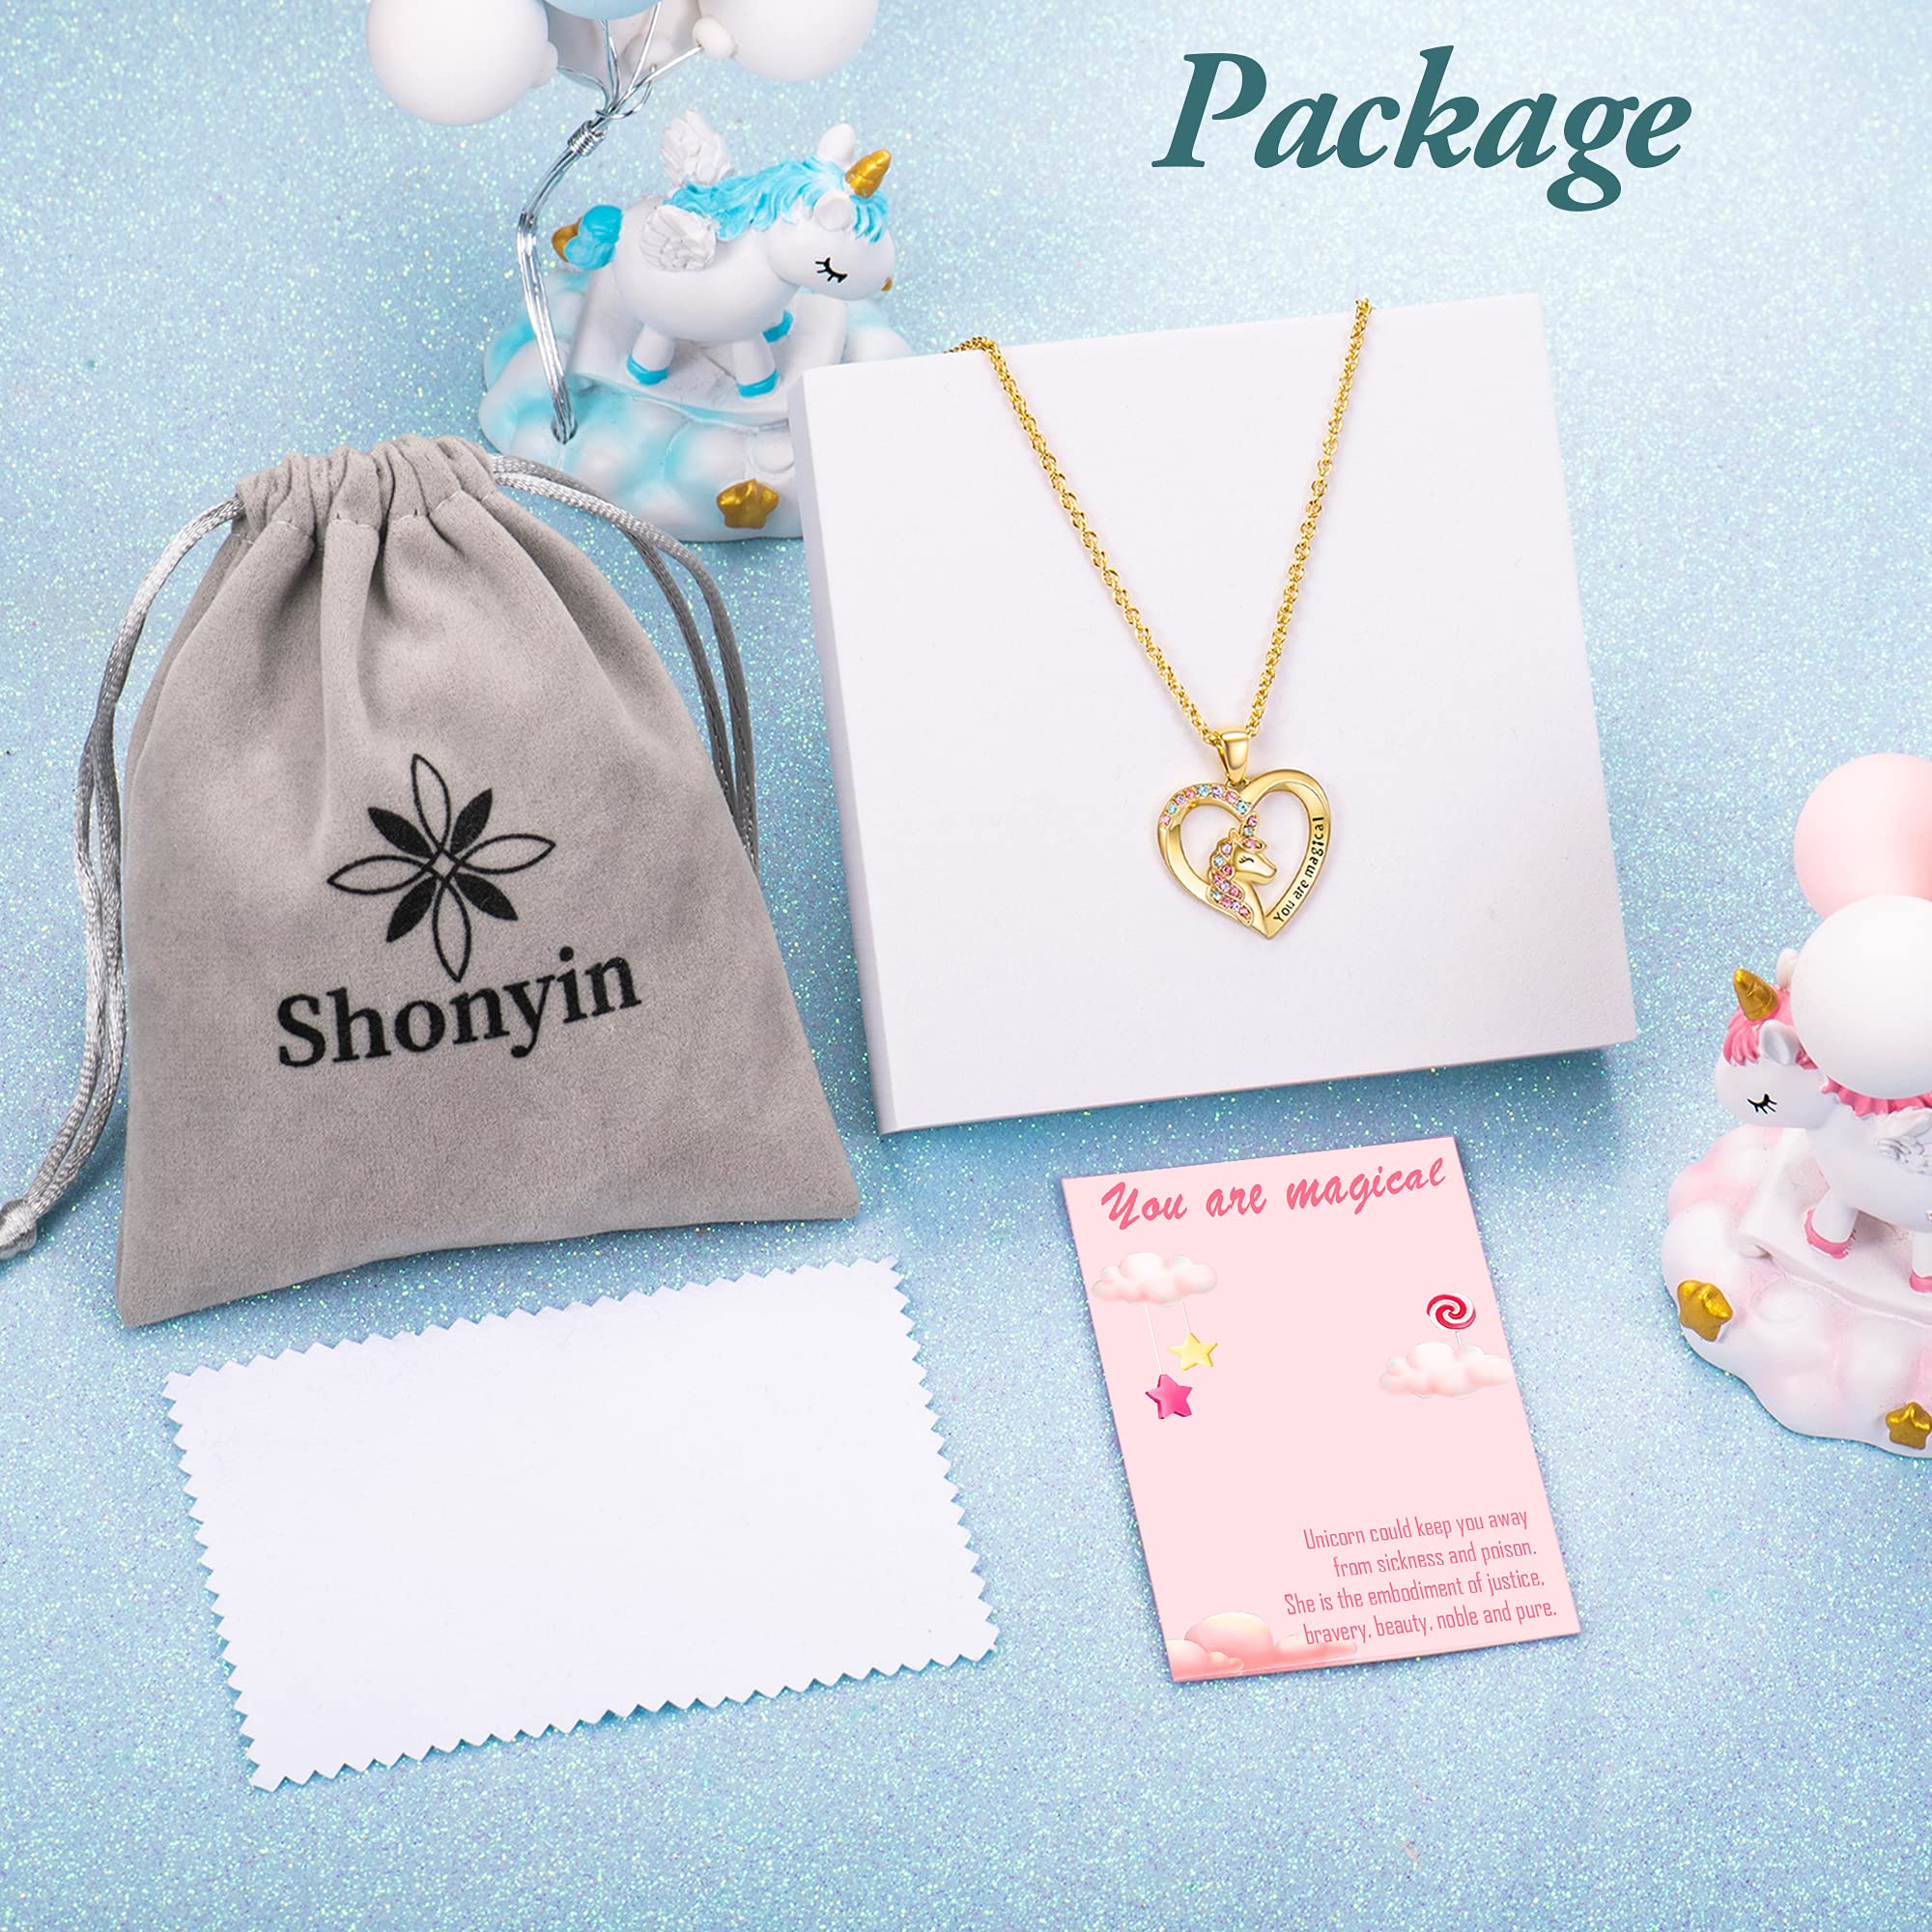 Shonyin Unicorn Necklace for Women Girls CZ Stone Heart Pendant Necklace With You Are Magical Message Christmas Birthday Party Jewelry Gift for Daughter Granddaughter Niece